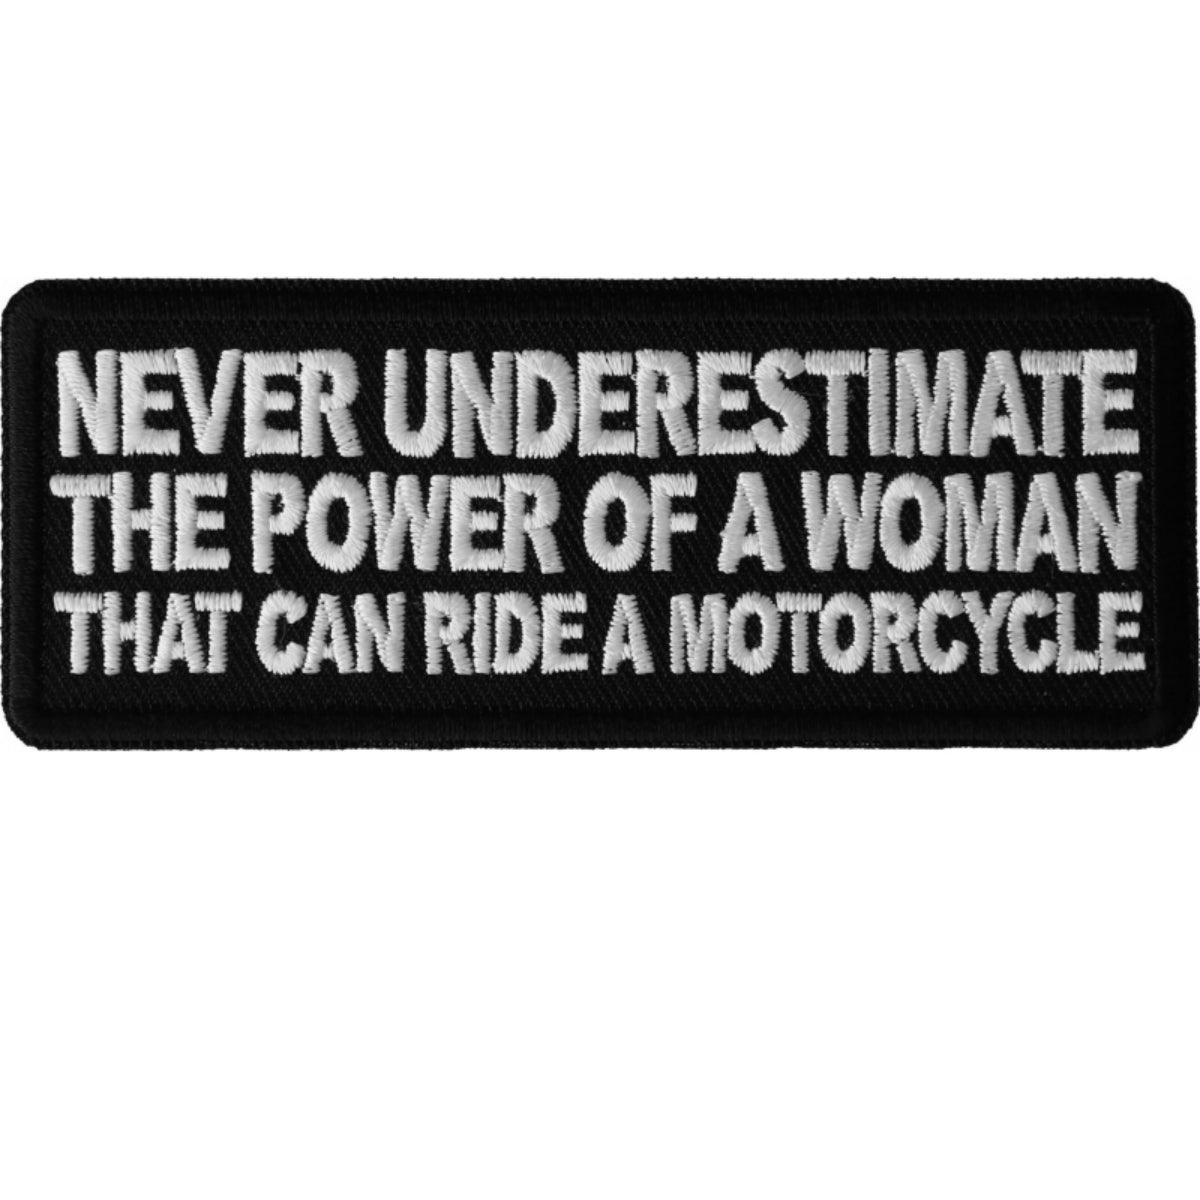 Daniel Smart Never Underestimate the Power of a Woman That Can Ride a Motorcycle Embroidered Iron on Patch, 4 x 1.5 inches - American Legend Rider